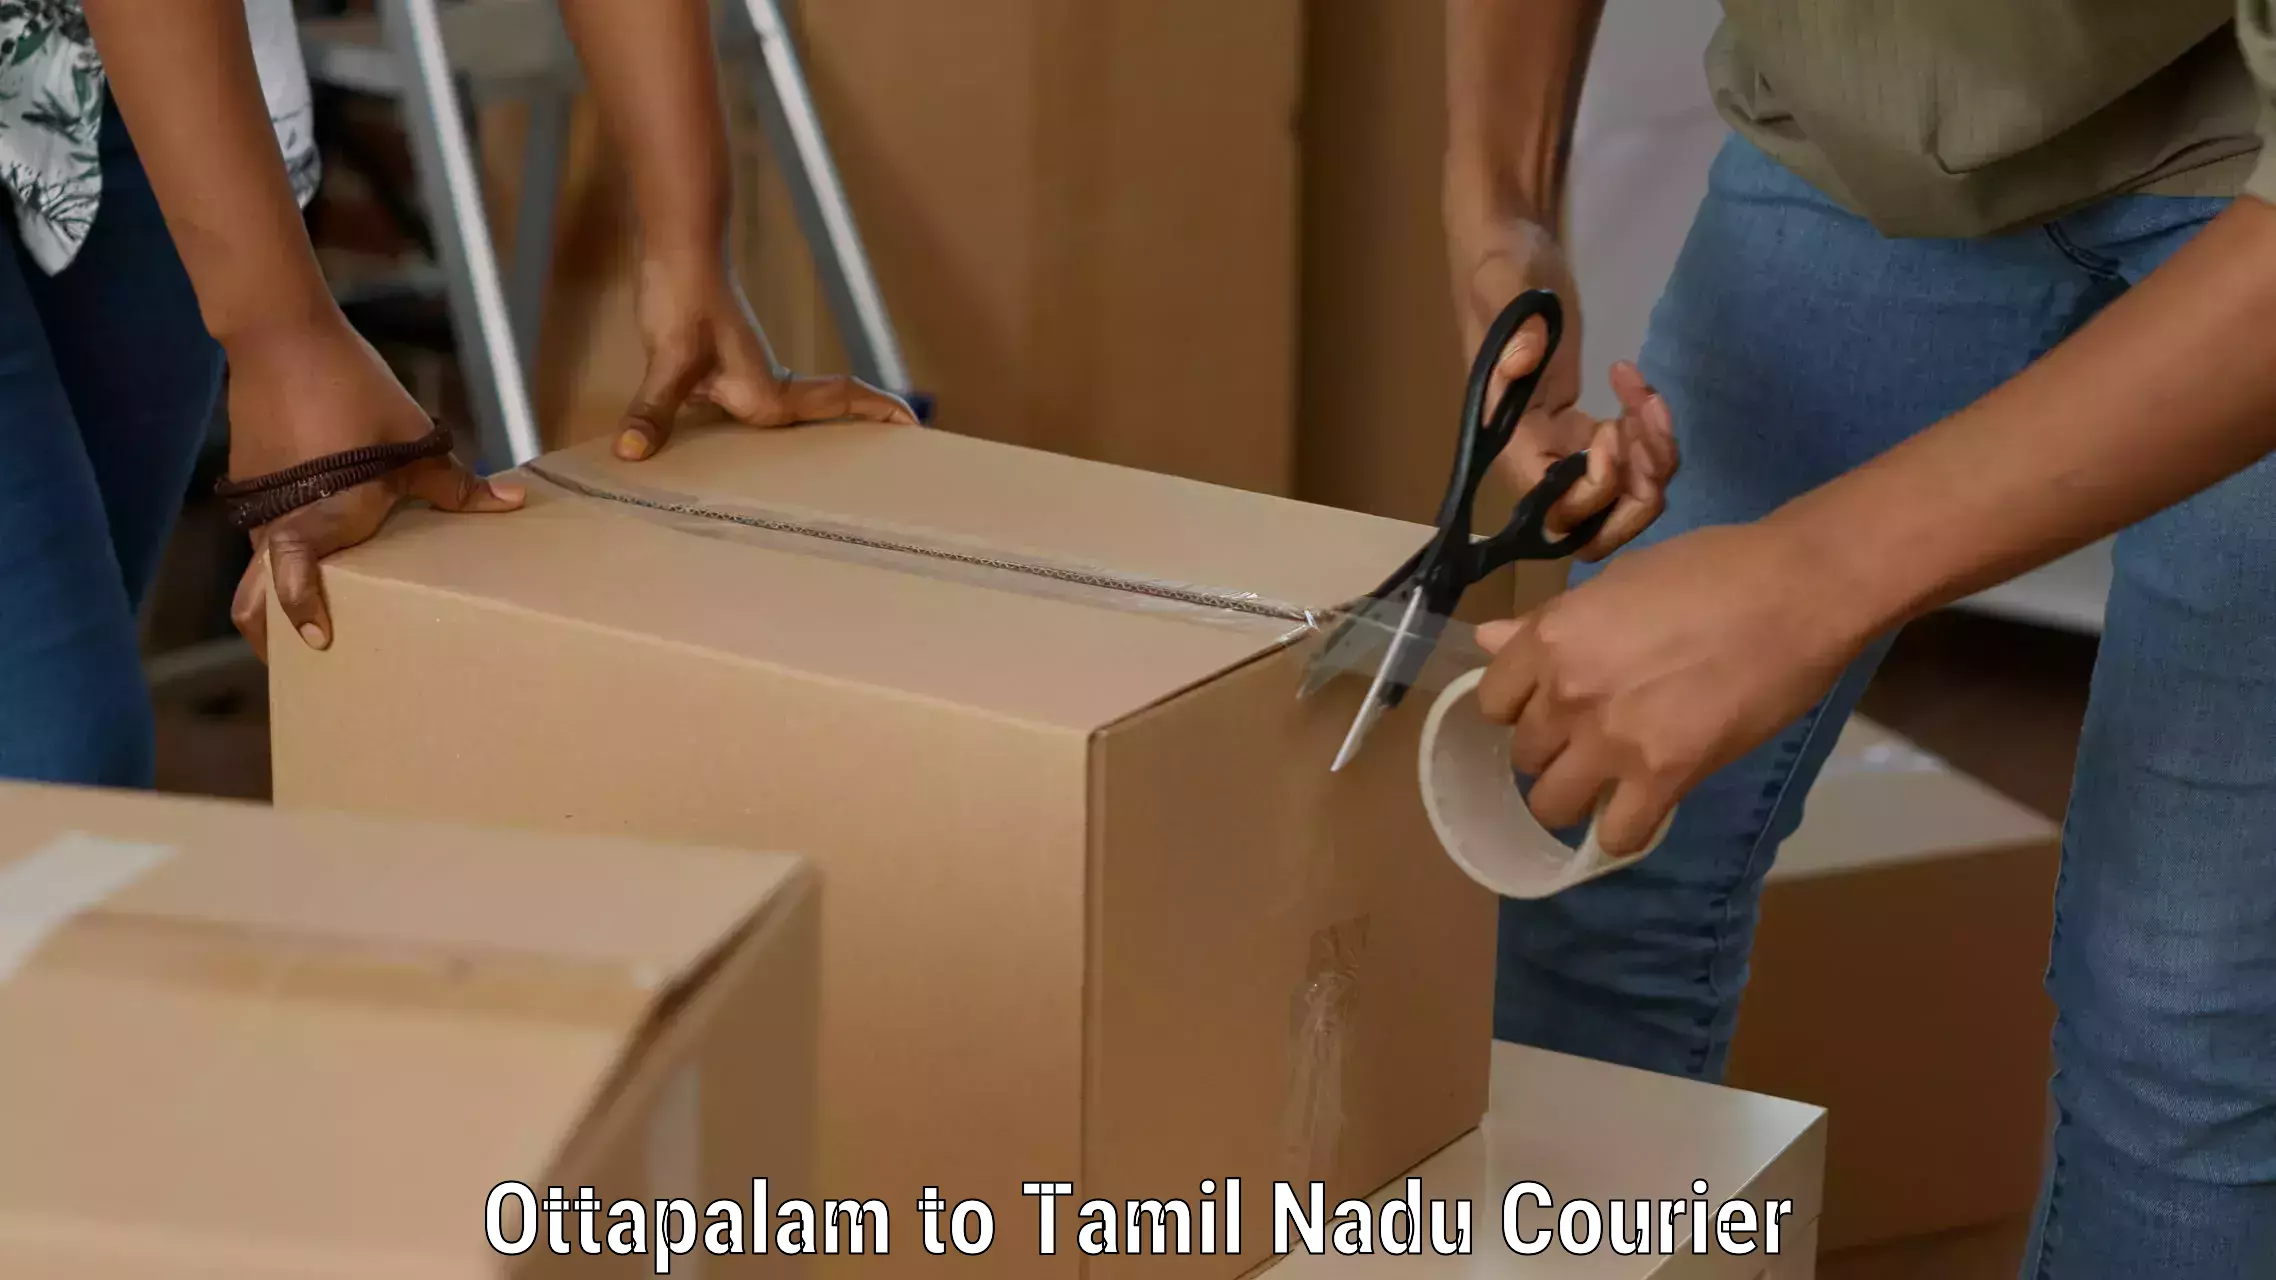 Discounted shipping Ottapalam to Tiruvallur